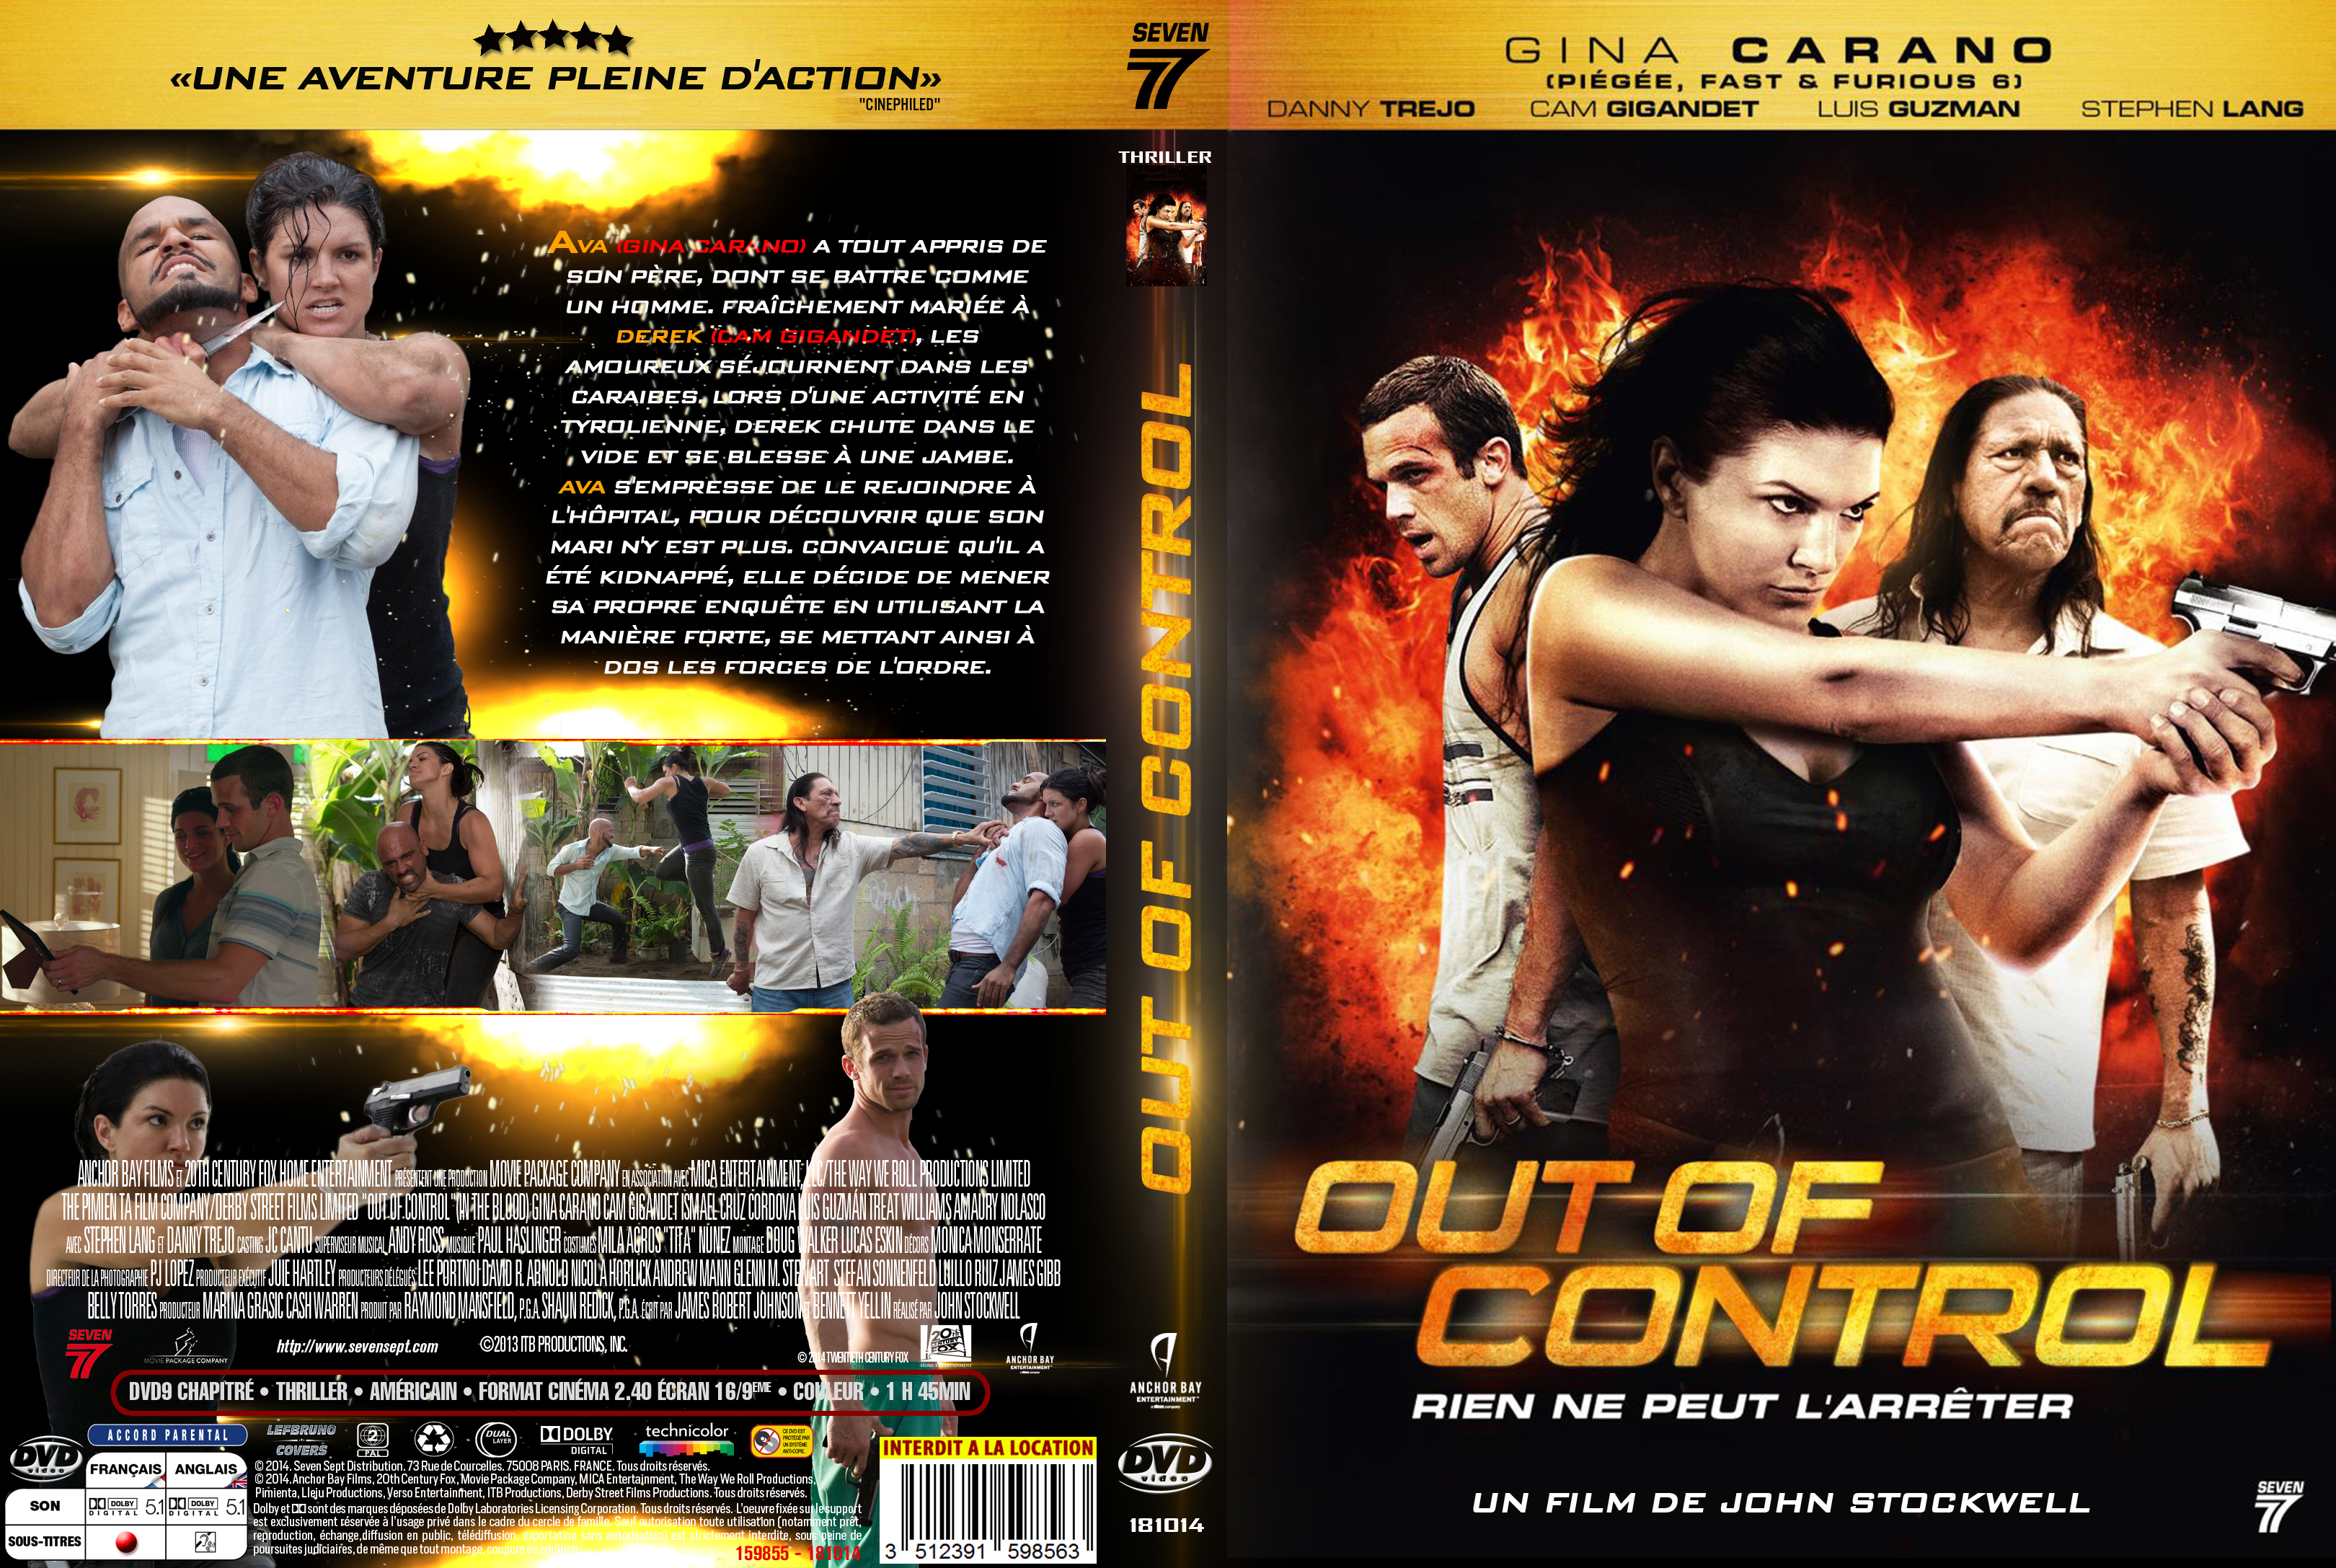 Jaquette DVD Out of Control custom